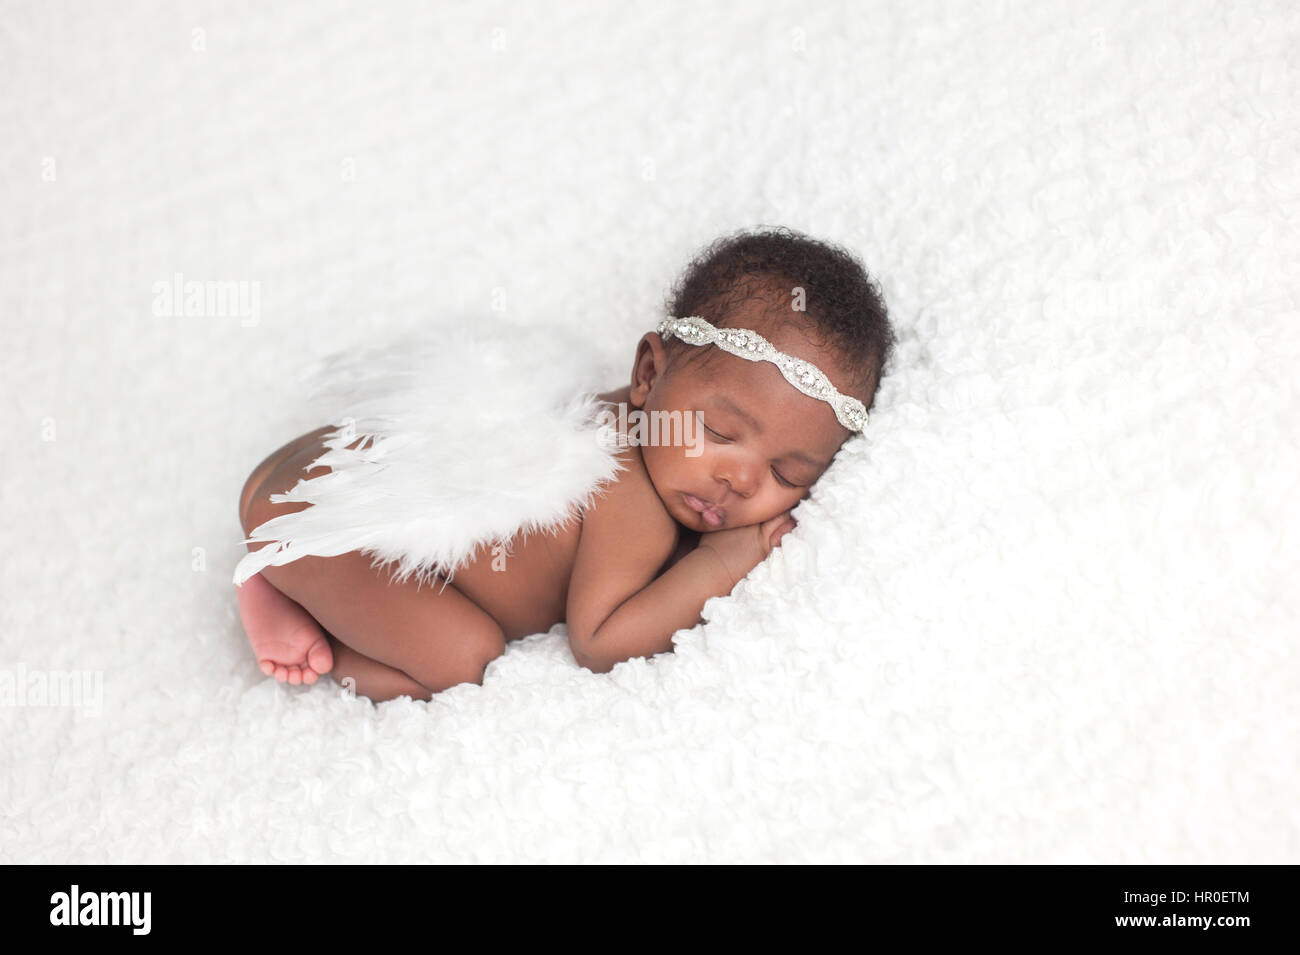 Portrait of a one month old, sleeping, newborn, baby girl. She is wearing a rhinestone headband, feather angel wings, and sleeping on a white blanket. Stock Photo